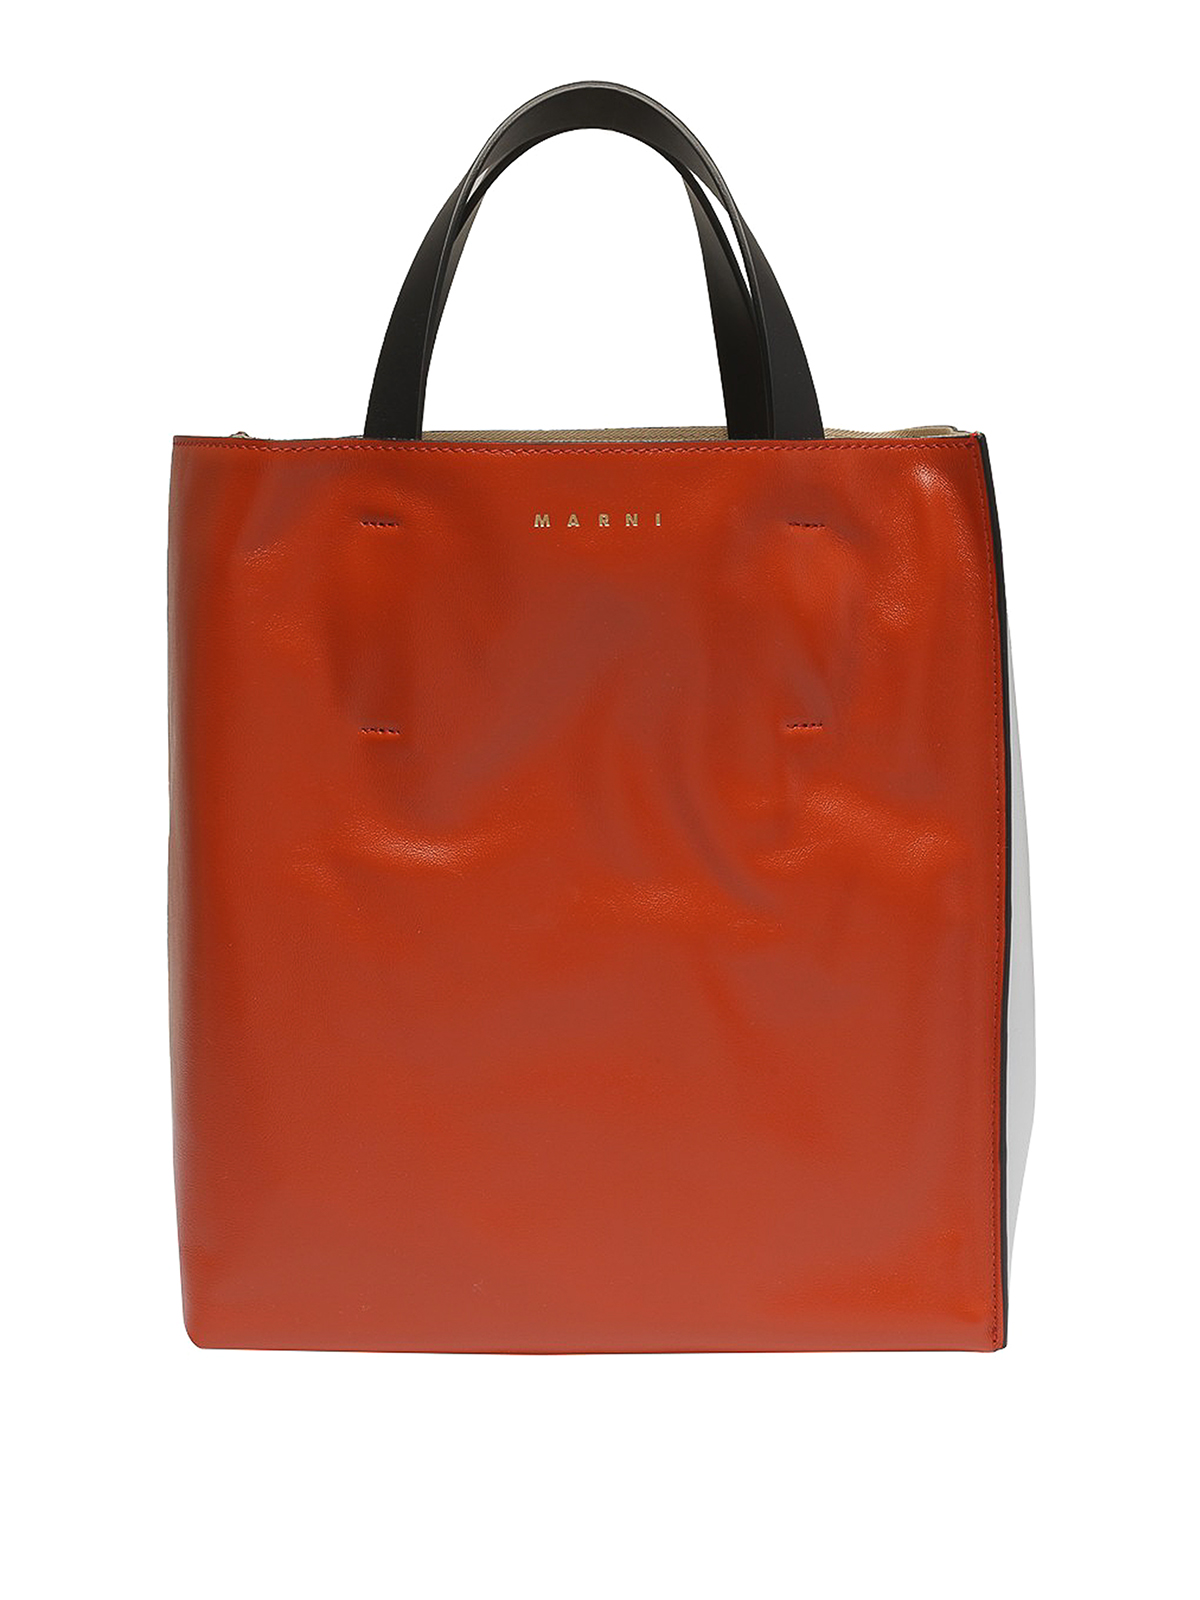 Marni Leather Bag With Contrast Back In Orange